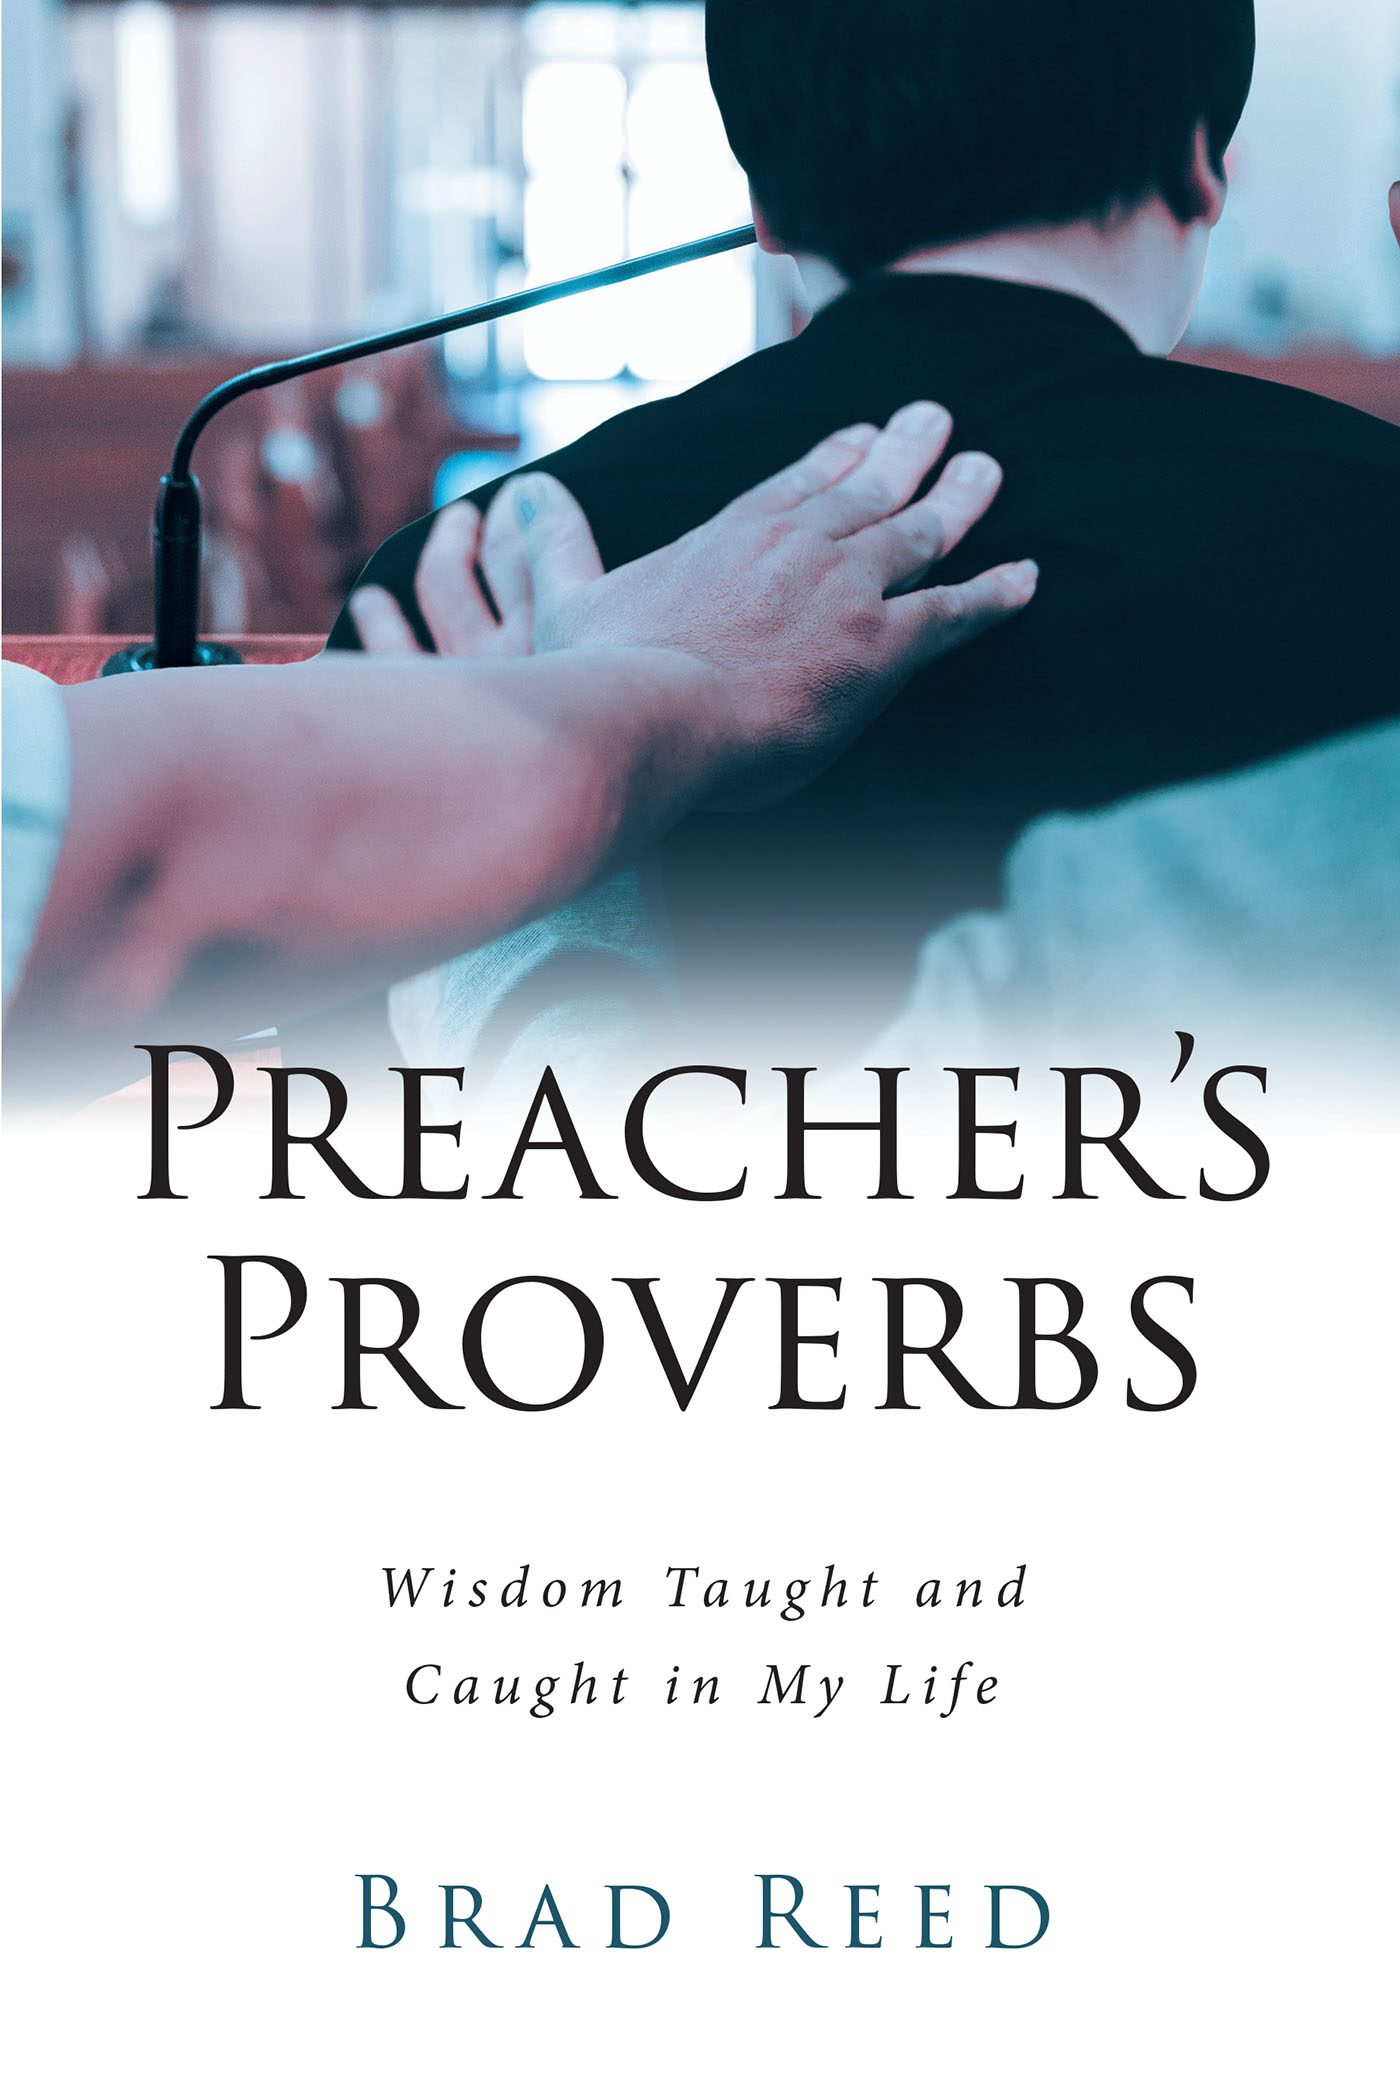 Brad Reed’s Newly Released "Preacher’s Proverbs: Wisdom Taught and Caught in My Life" is an Encouraging Pastoral Resource